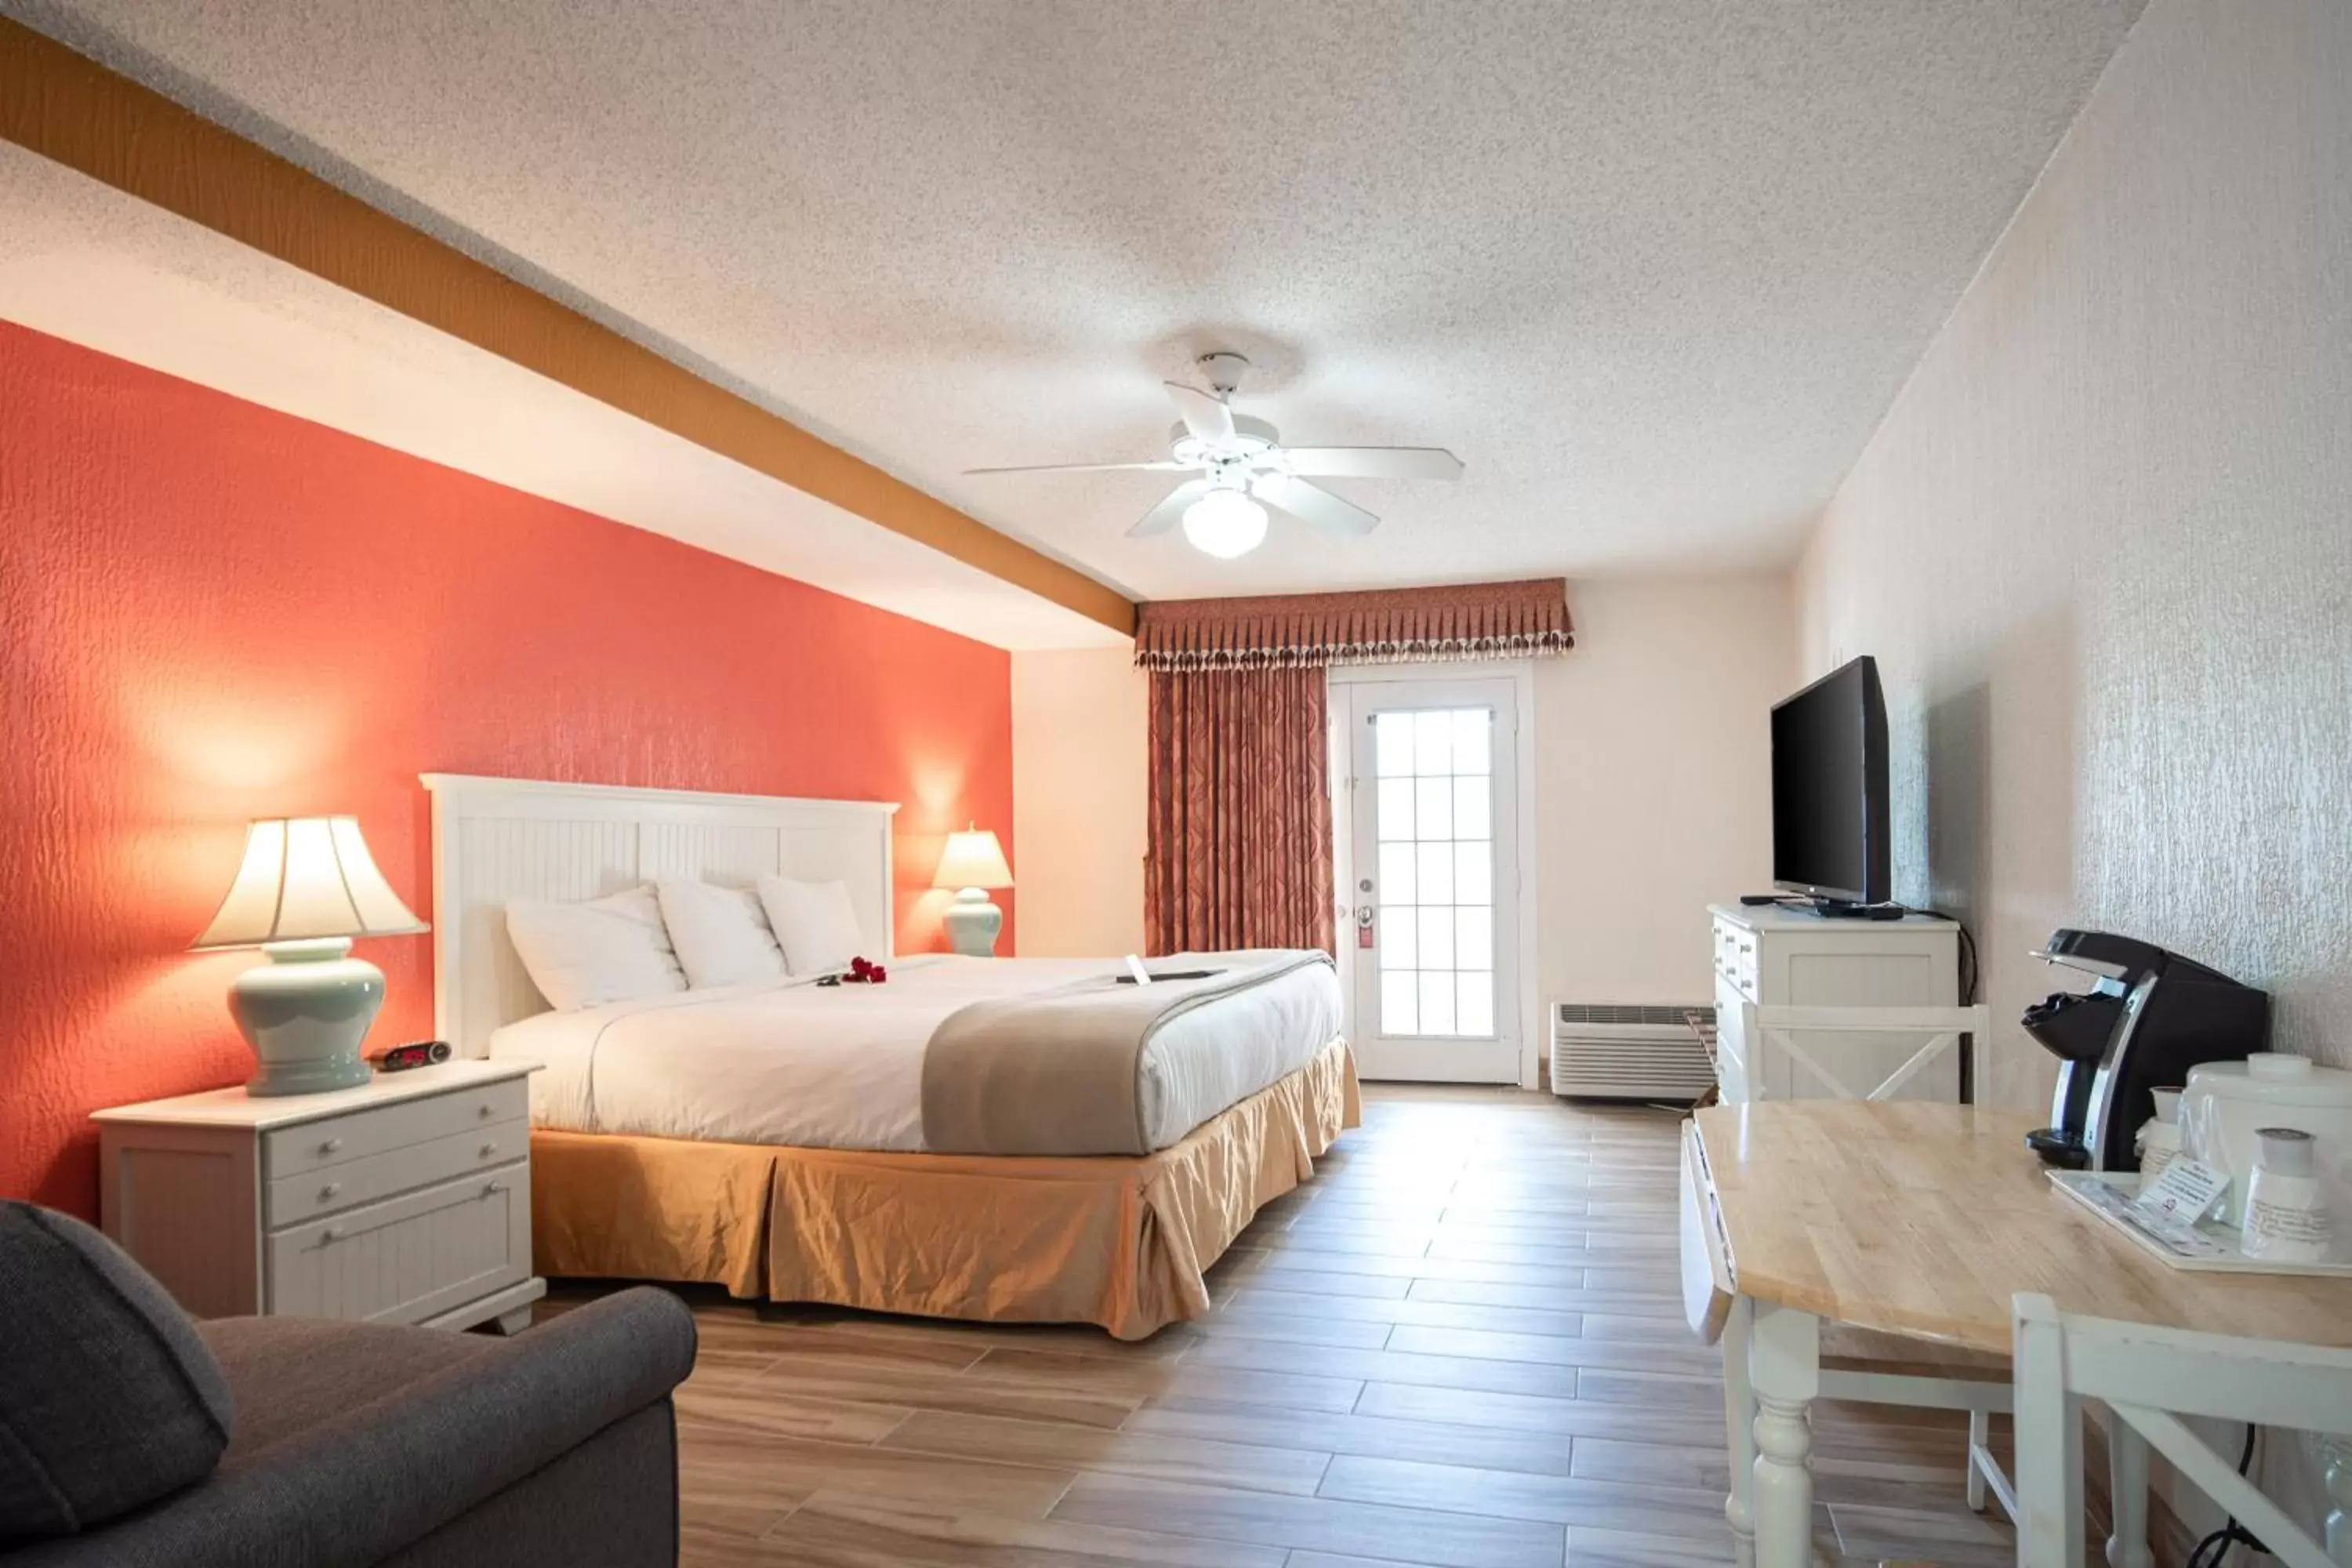 Photo of the whole room in Island Sun Inn & Suites - Venice, Florida Historic Downtown & Beach Getaway